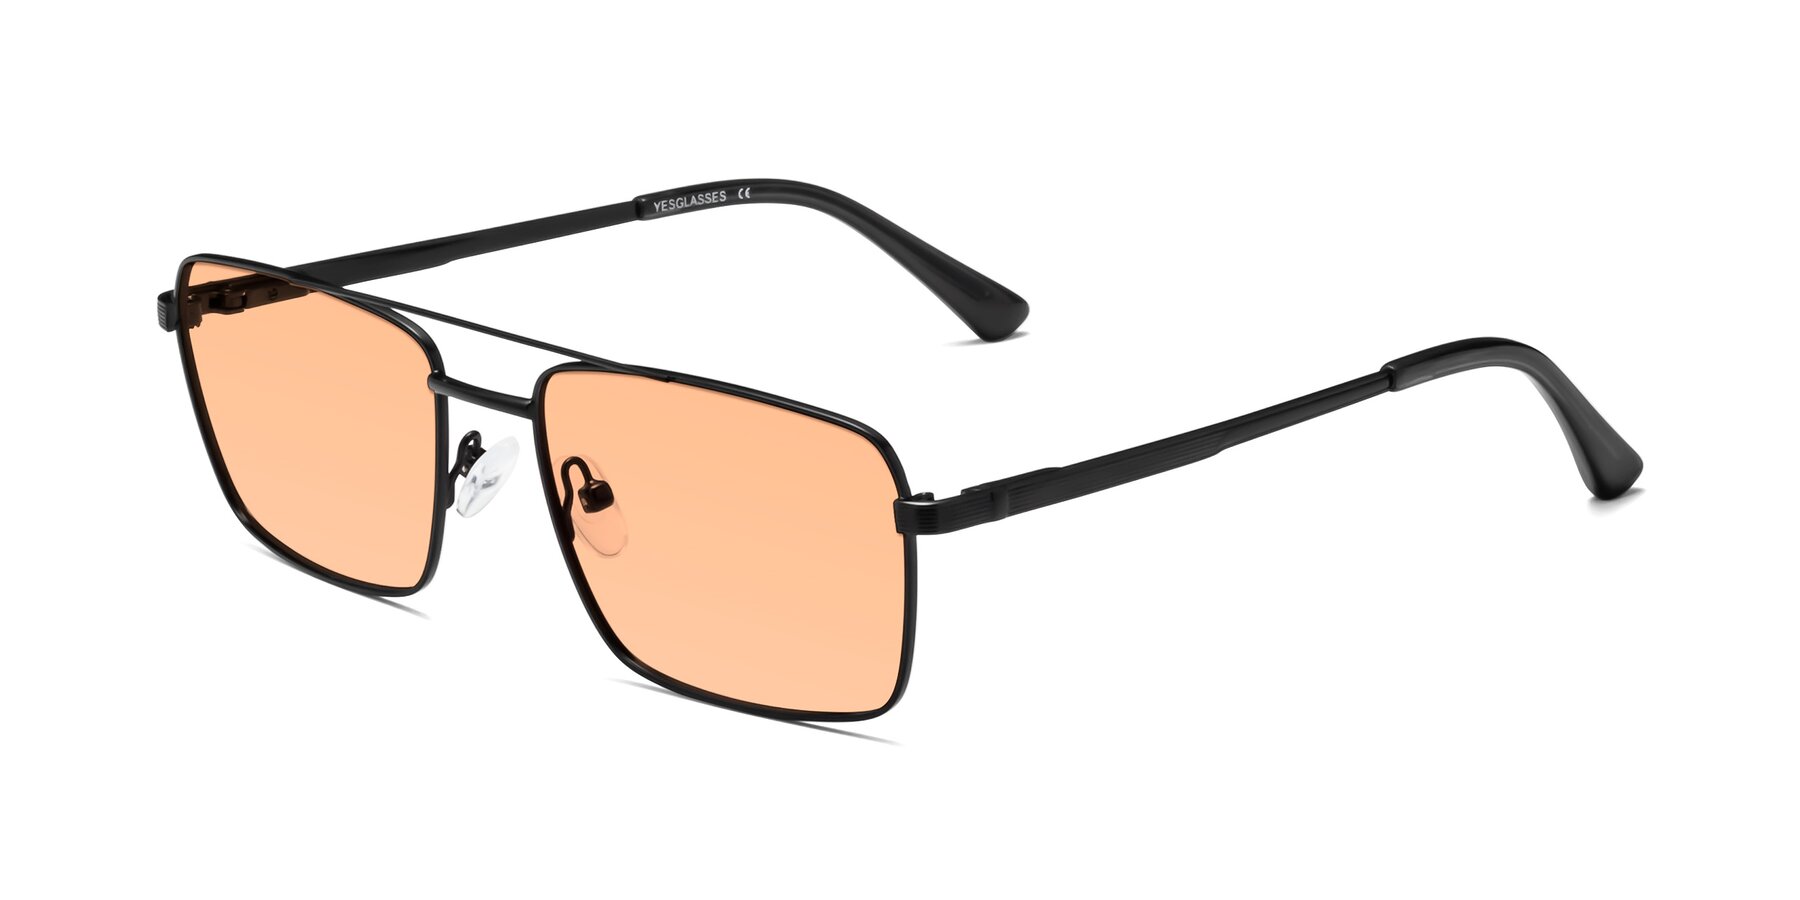 Angle of 9469 in Black with Light Orange Tinted Lenses